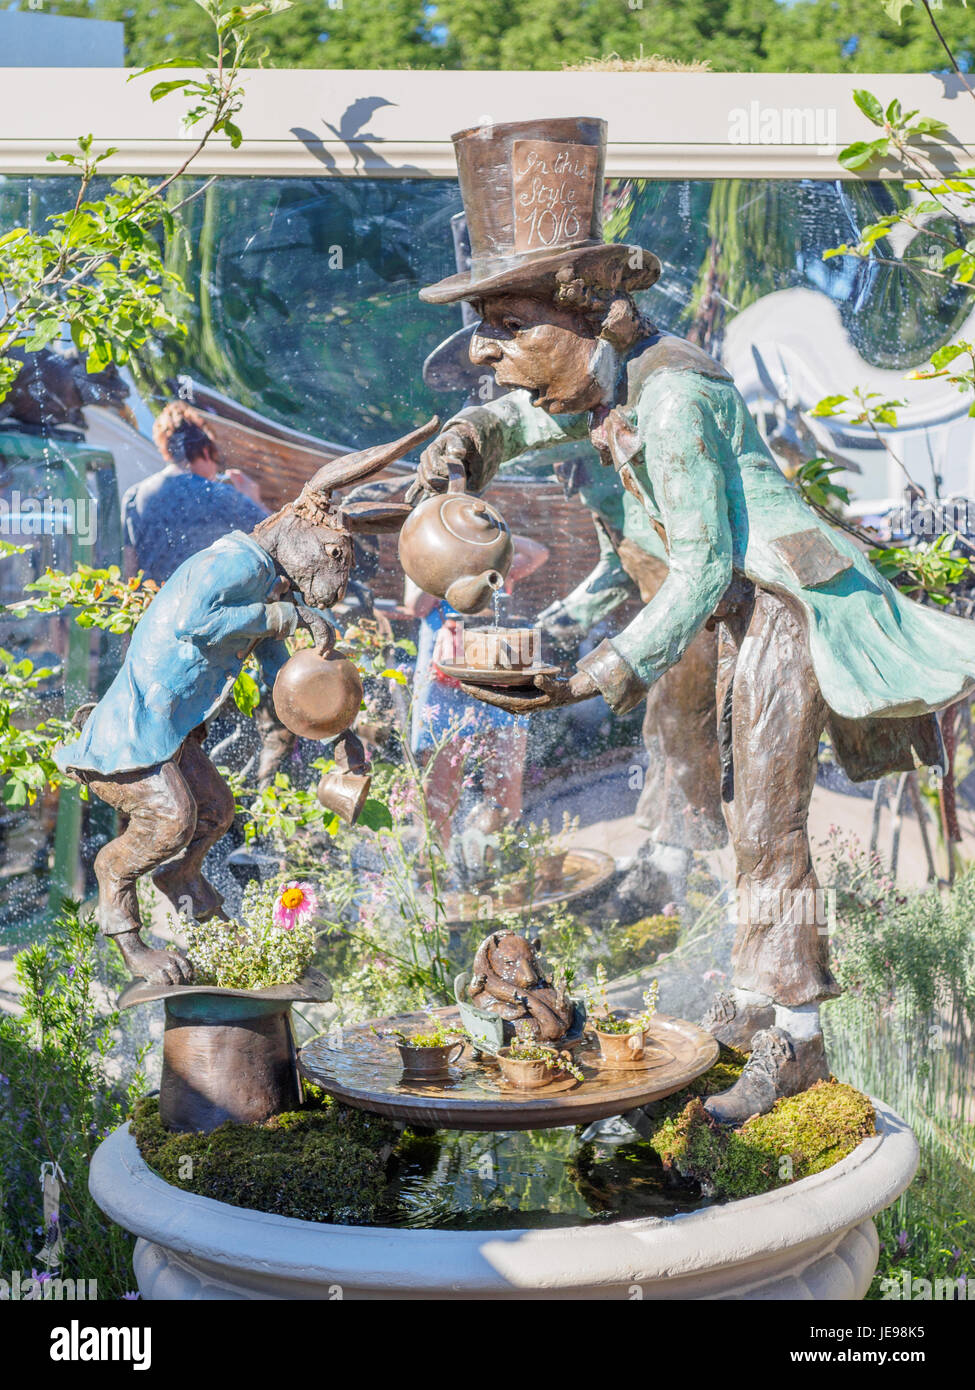 LONDON, UK - MAY 25, 2017: RHS Chelsea Flower Show 2017. Lewis Carroll's 'Alice in Wonderland' characters as sculptured garden figures. Stock Photo